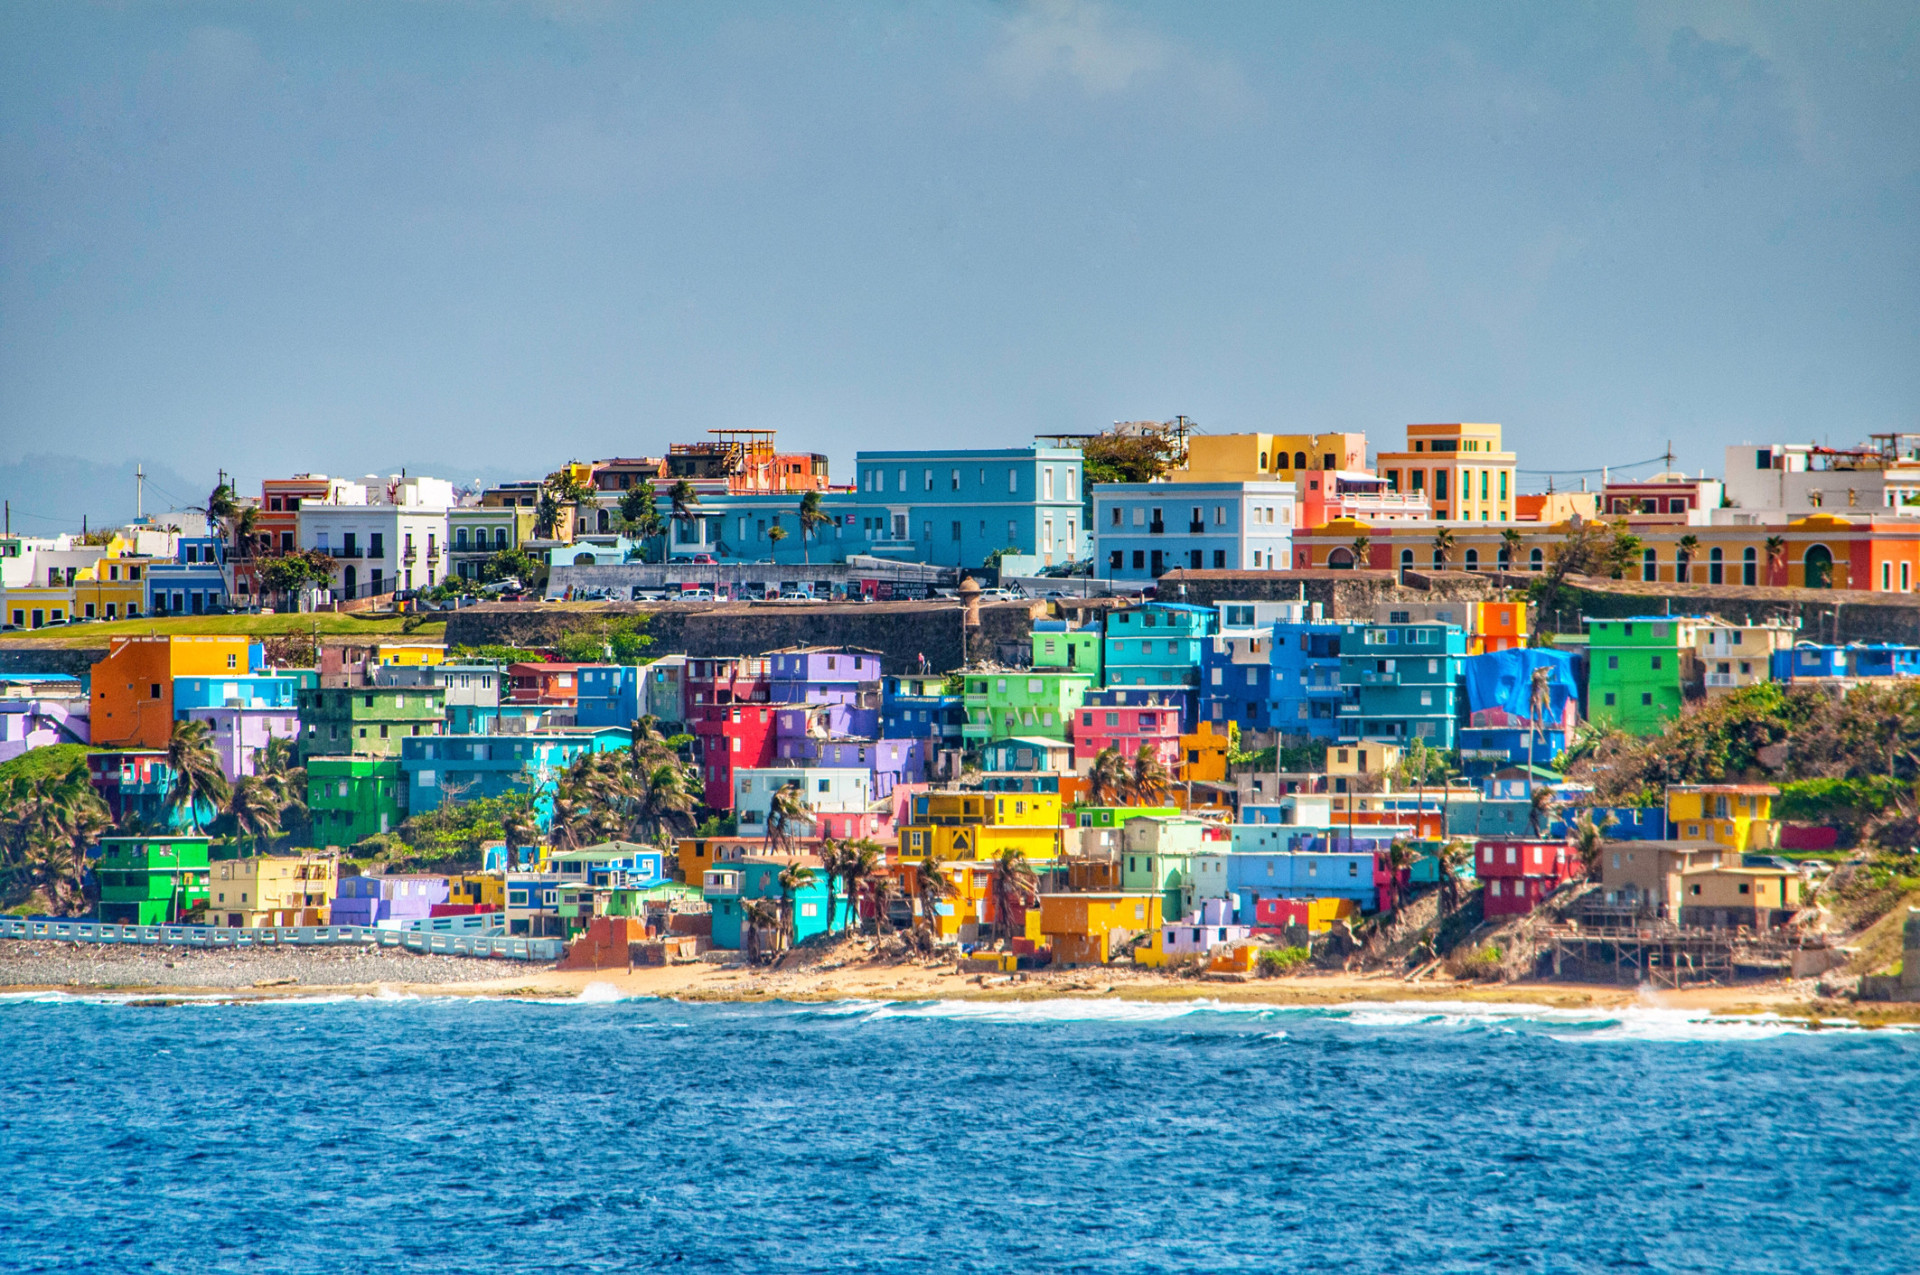 The capital city of America's sole Caribbean territory is perhaps the quintessential colorful colonial city.<p><a href="https://www.msn.com/en-us/community/channel/vid-7xx8mnucu55yw63we9va2gwr7uihbxwc68fxqp25x6tg4ftibpra?cvid=94631541bc0f4f89bfd59158d696ad7e">Follow us and access great exclusive content every day</a></p>